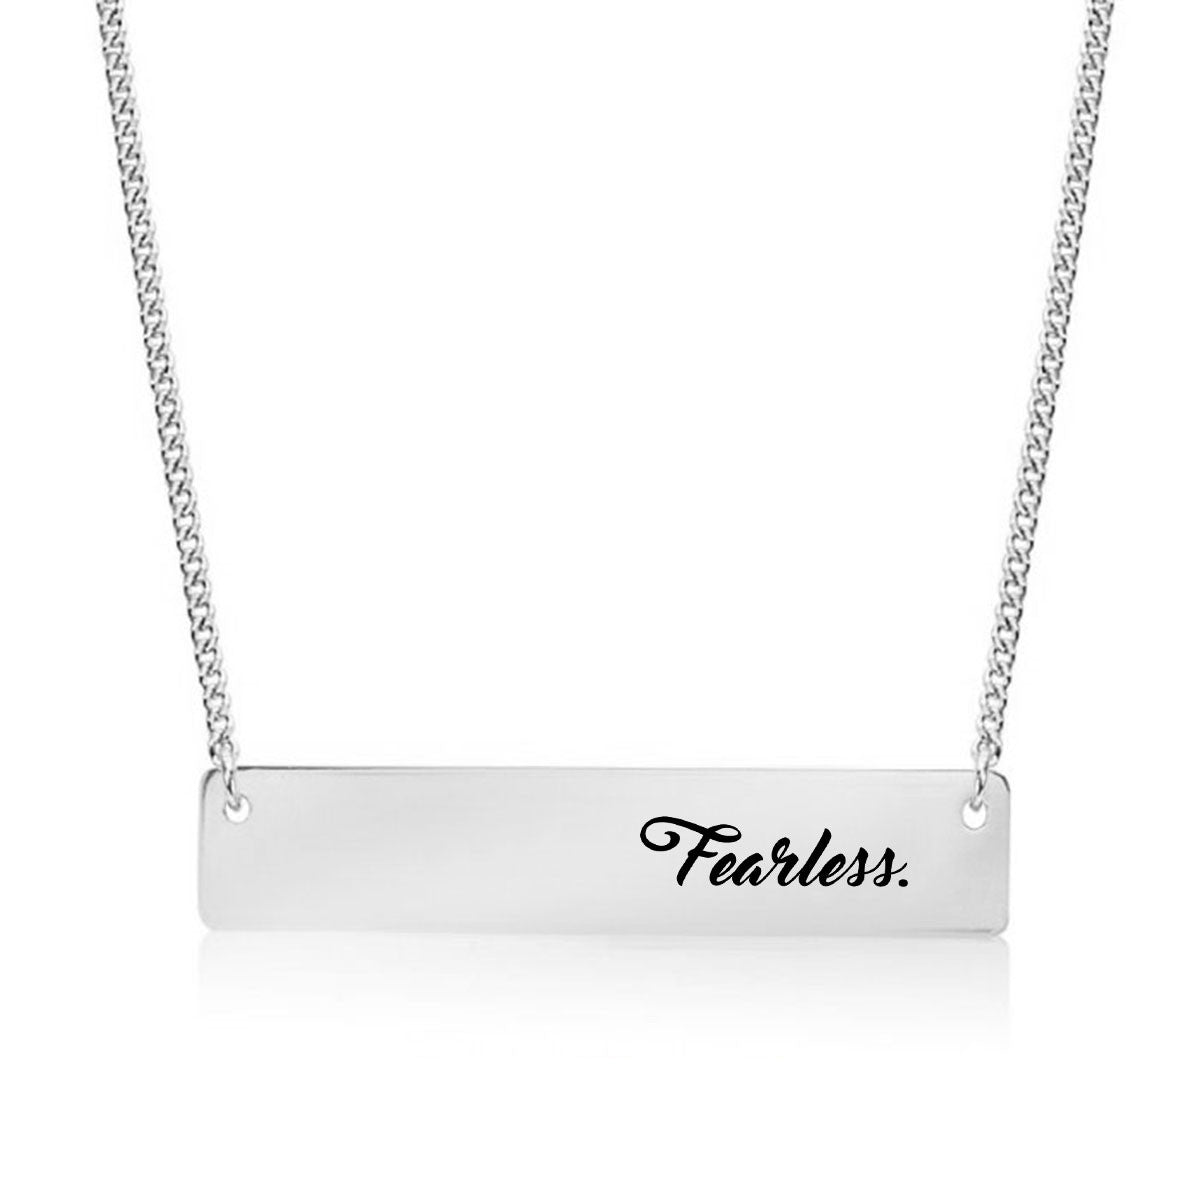 Fearless Gold / Silver Bar Necklace - pipercleo.com